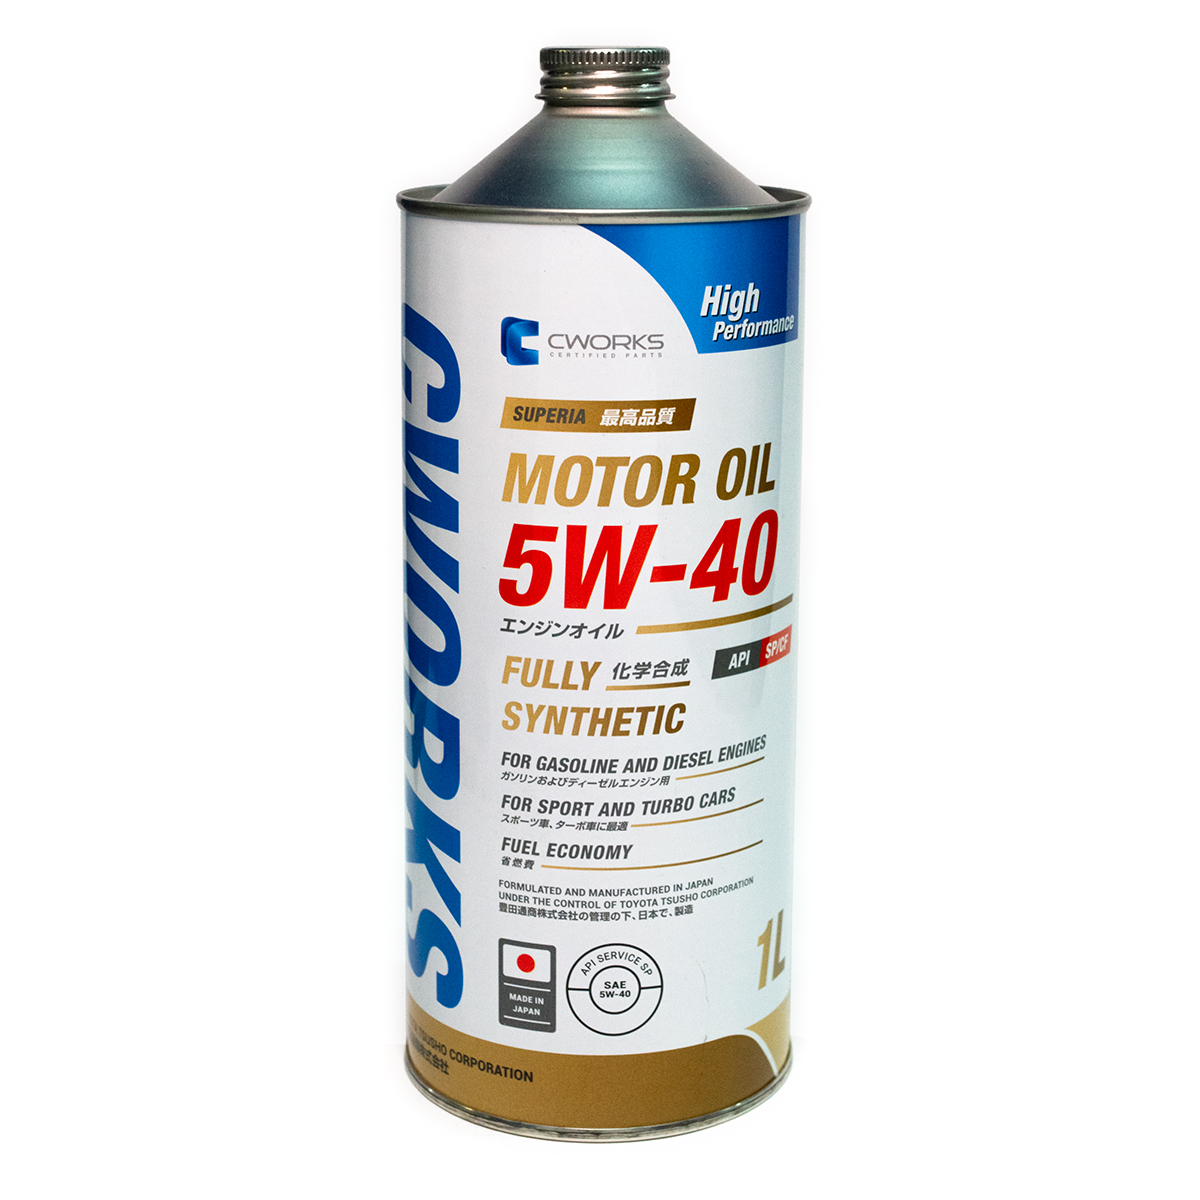 Superia  motor OIL 5w-40 sp/cf, 1L Масло моторное - CWORKS A13SR2001